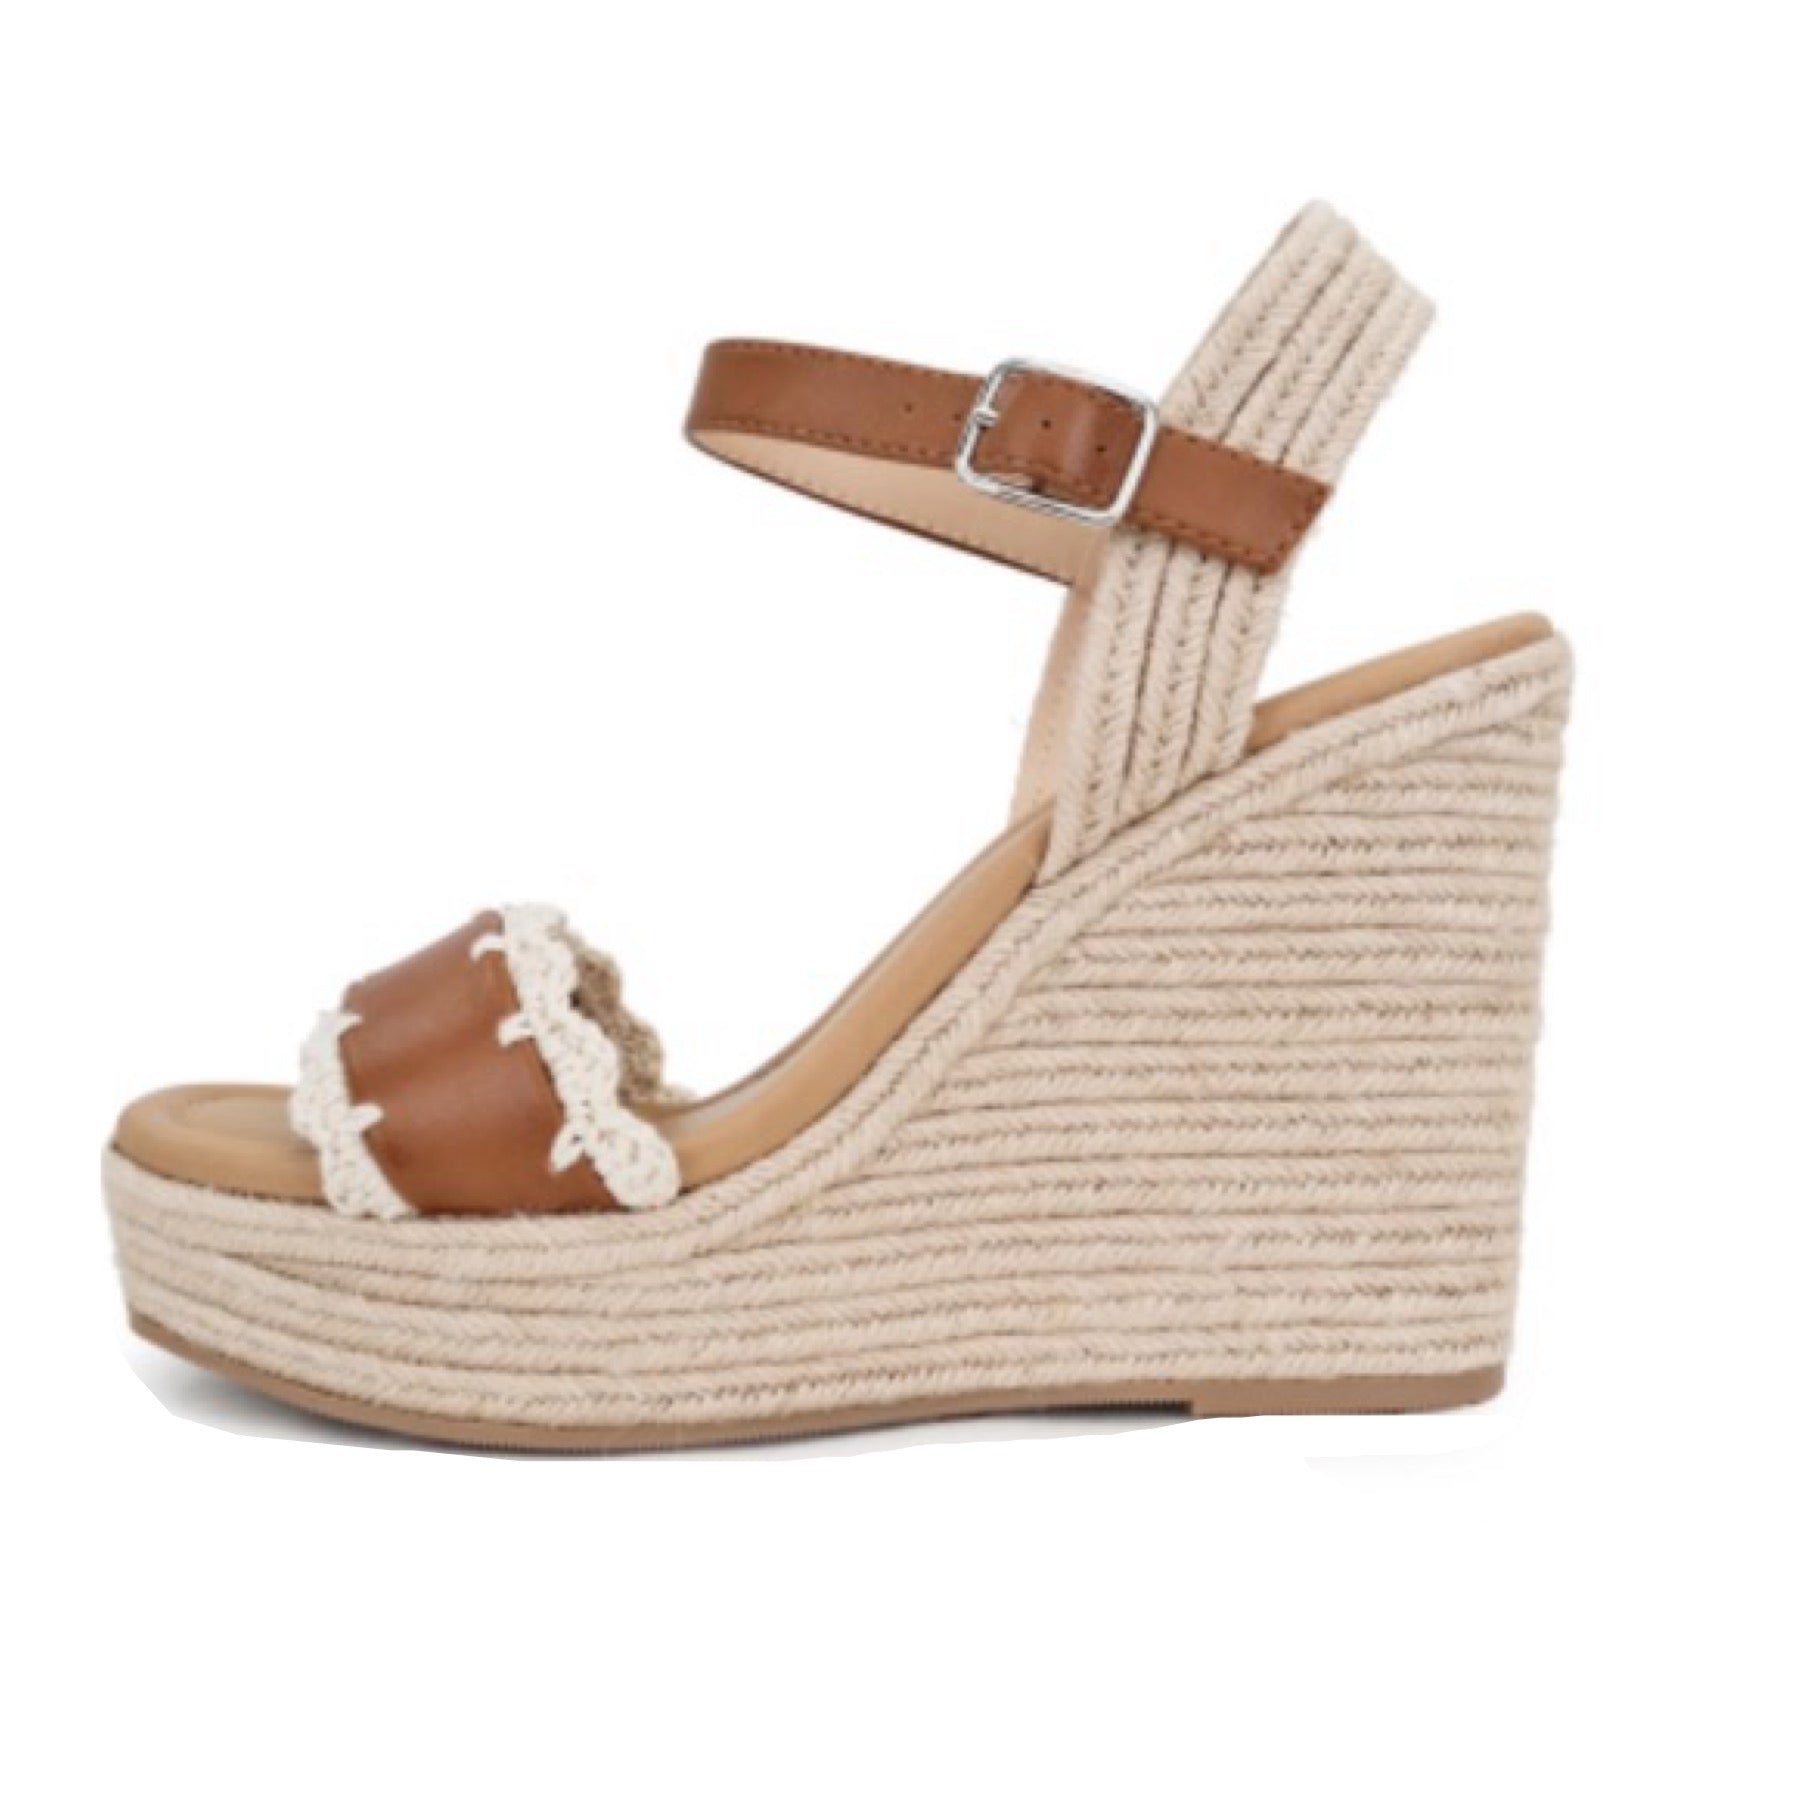 Scallop Lace Open Toe Wedge Sandals in Tan